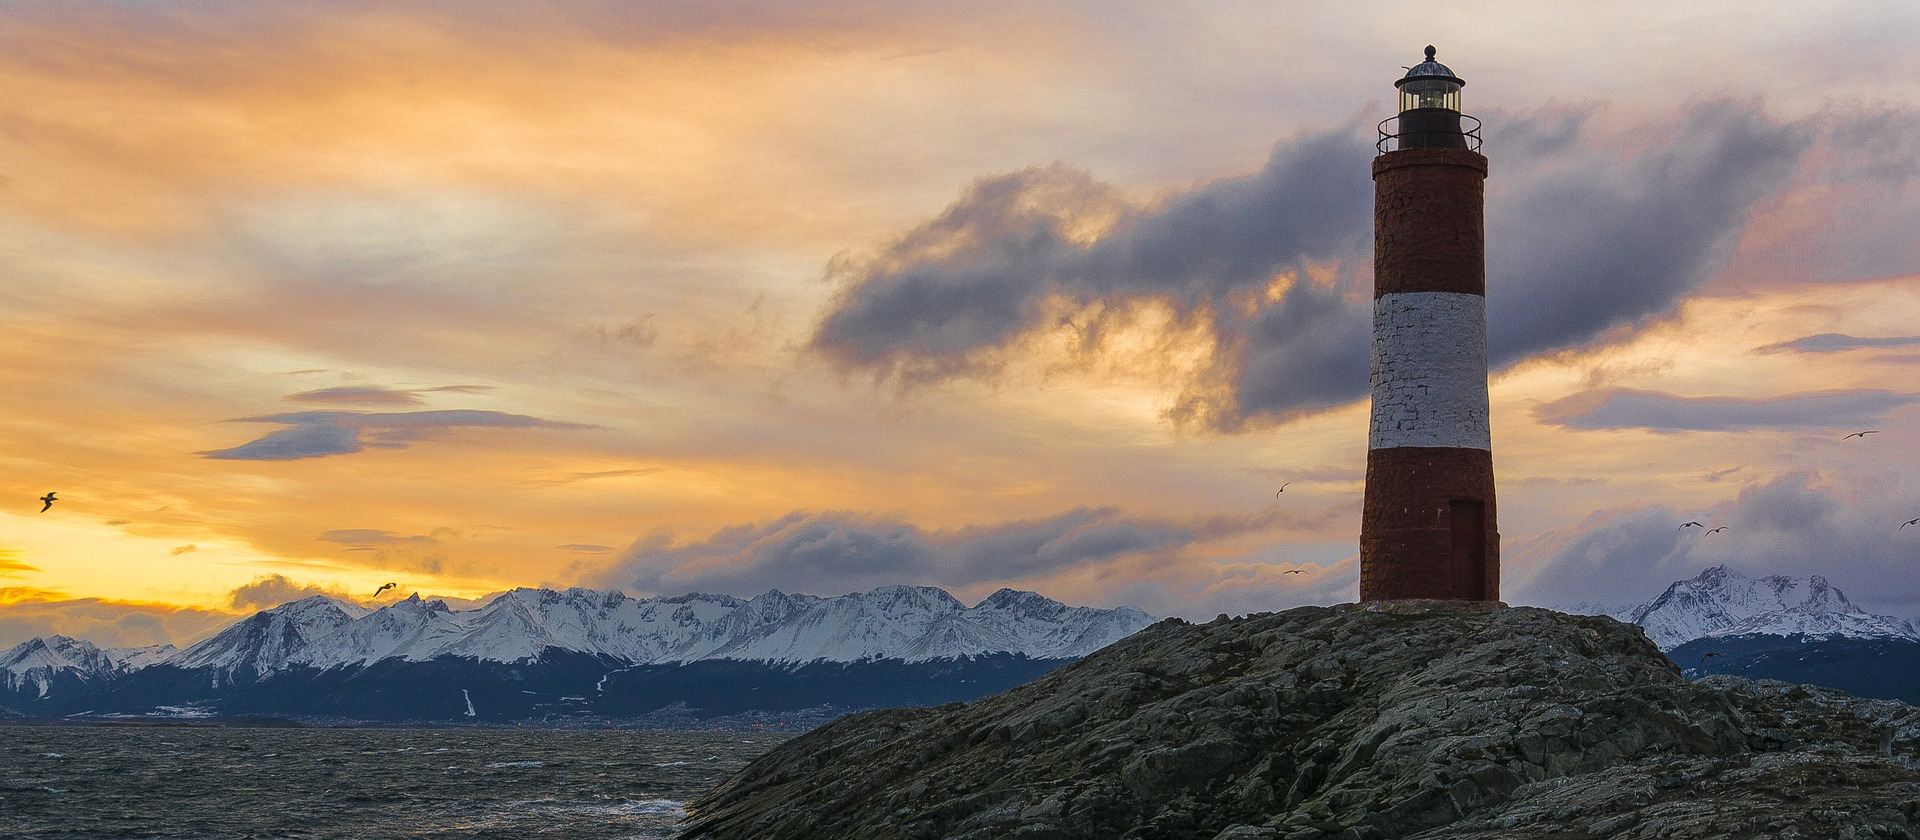 Lighthouse overlooks sea and mountains in Ushuaia, Argentina.